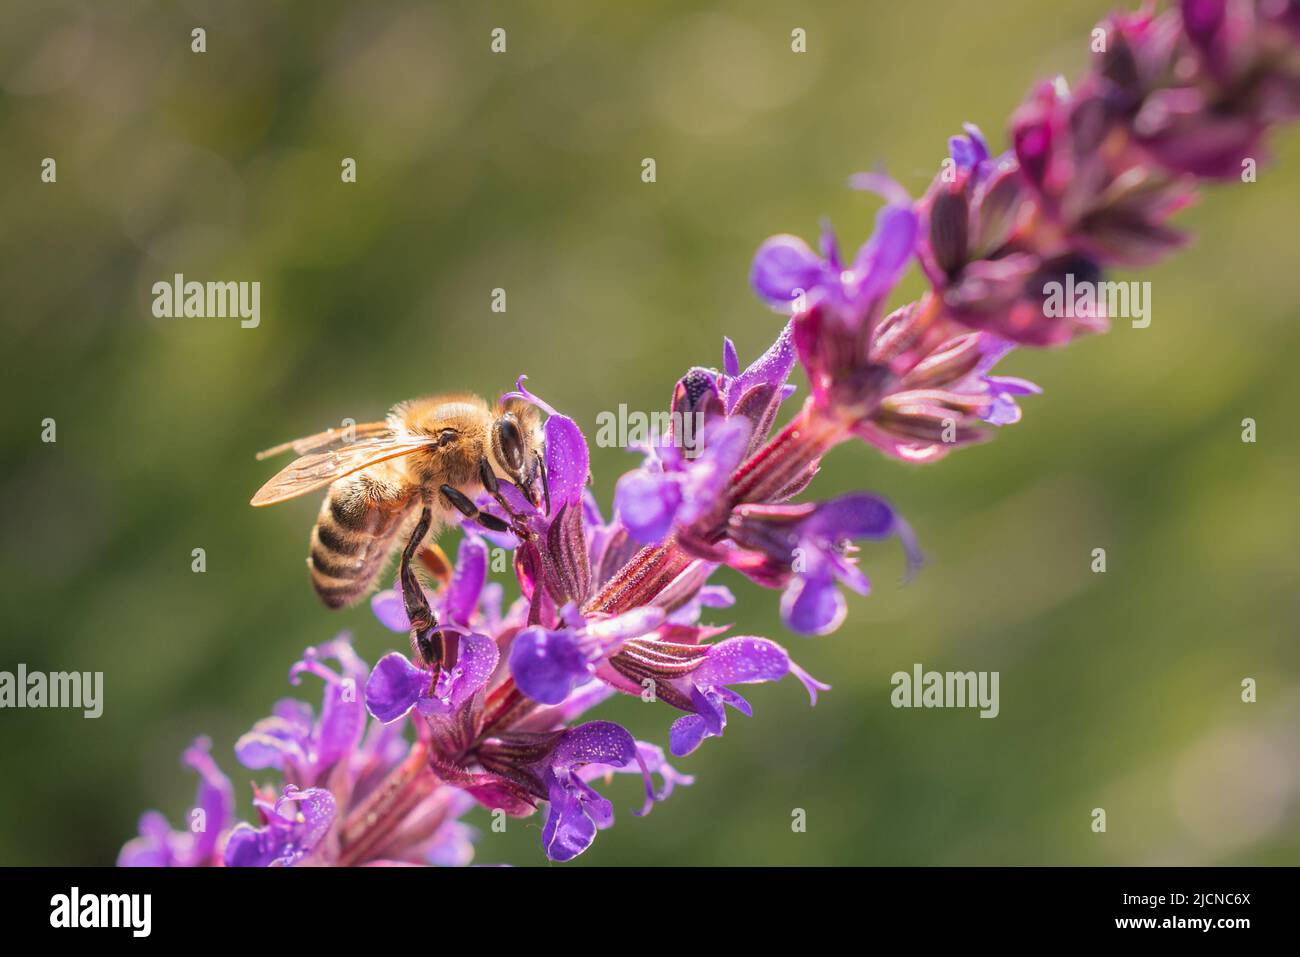 Purple Salvia flowers with a bee on them holding the petals and reaching in side for nectar. Stock Photo